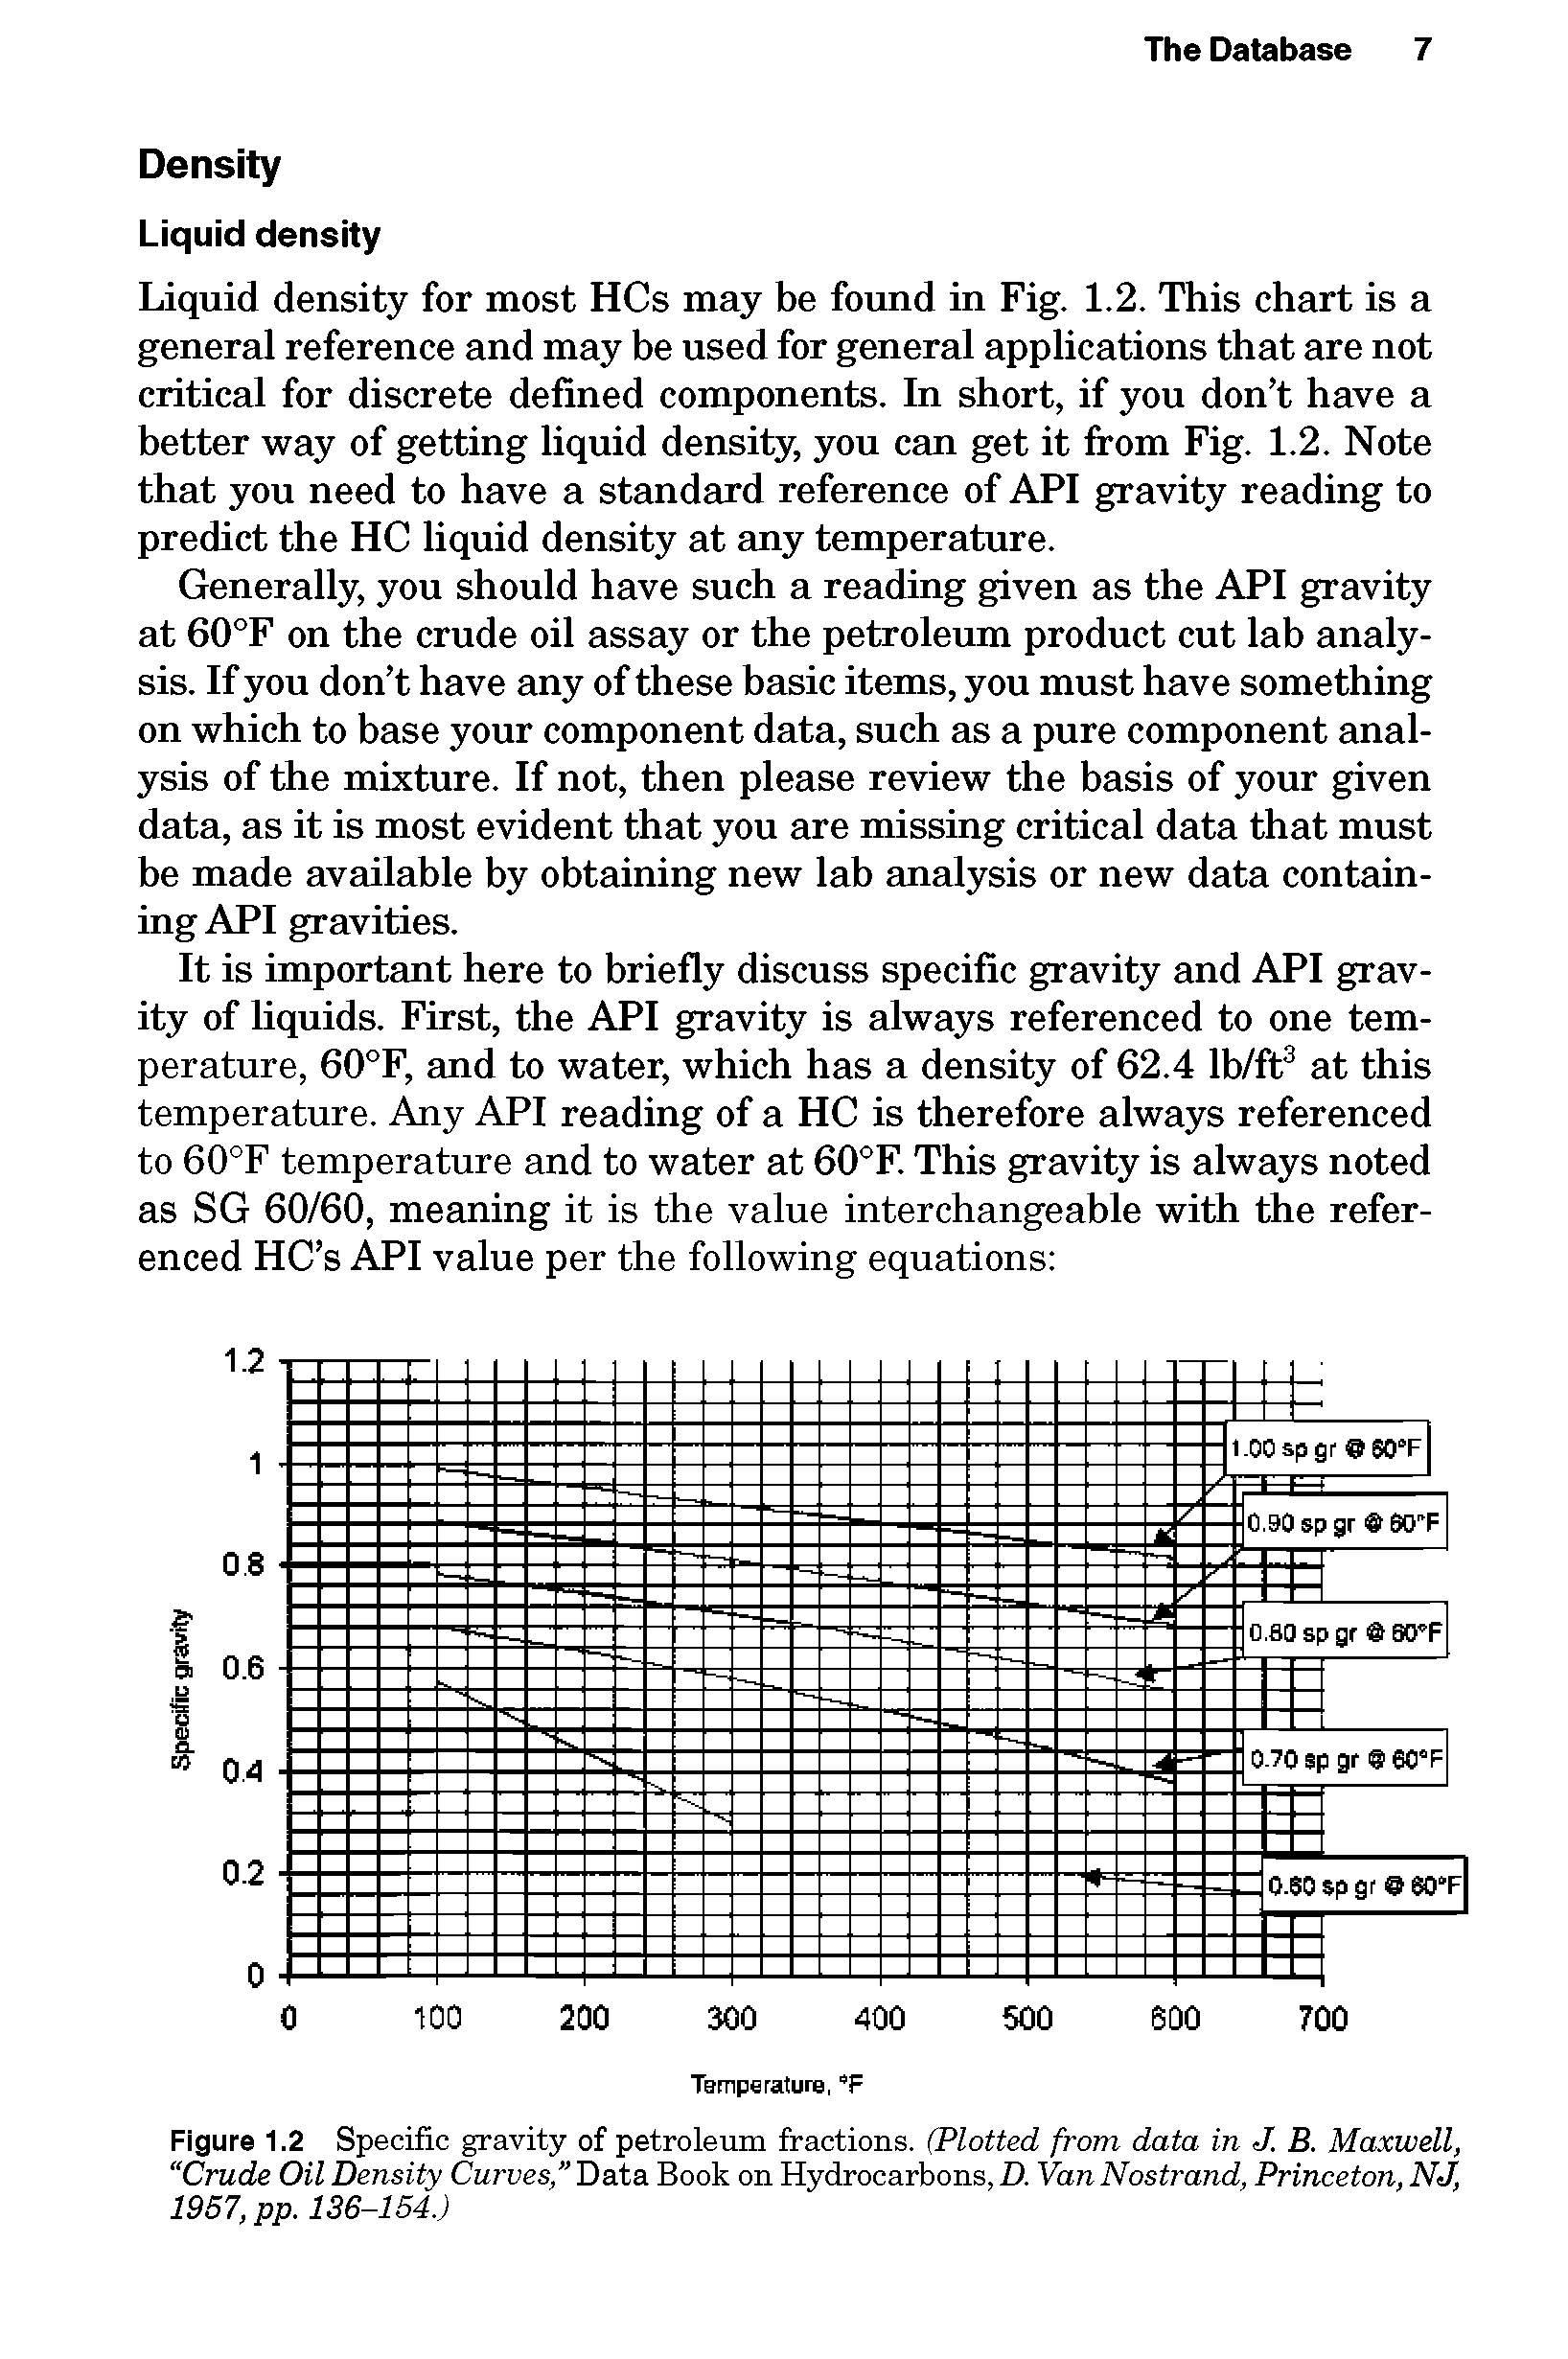 Figure 1.2 Specific gravity of petroleum fractions. (Plotted from data in J. B. Maxwell, Crude Oil Density Curves, Data Book on Hydrocarbons, D. Van Nostrand, Princeton, NJ, 1957, pp. 136-154.)...